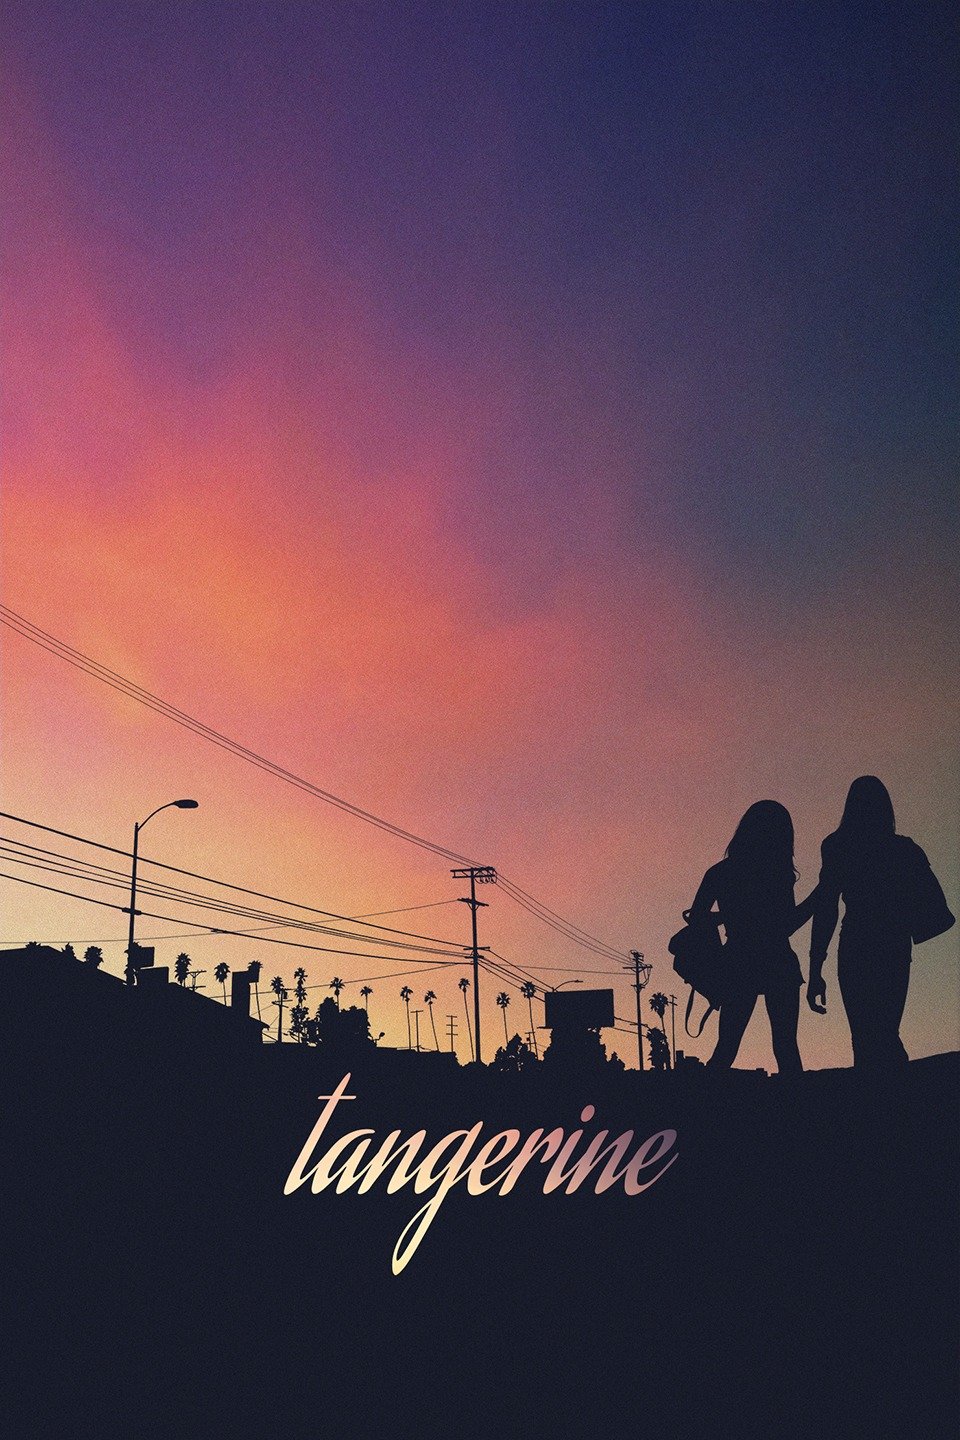 link to google search of Tangerine